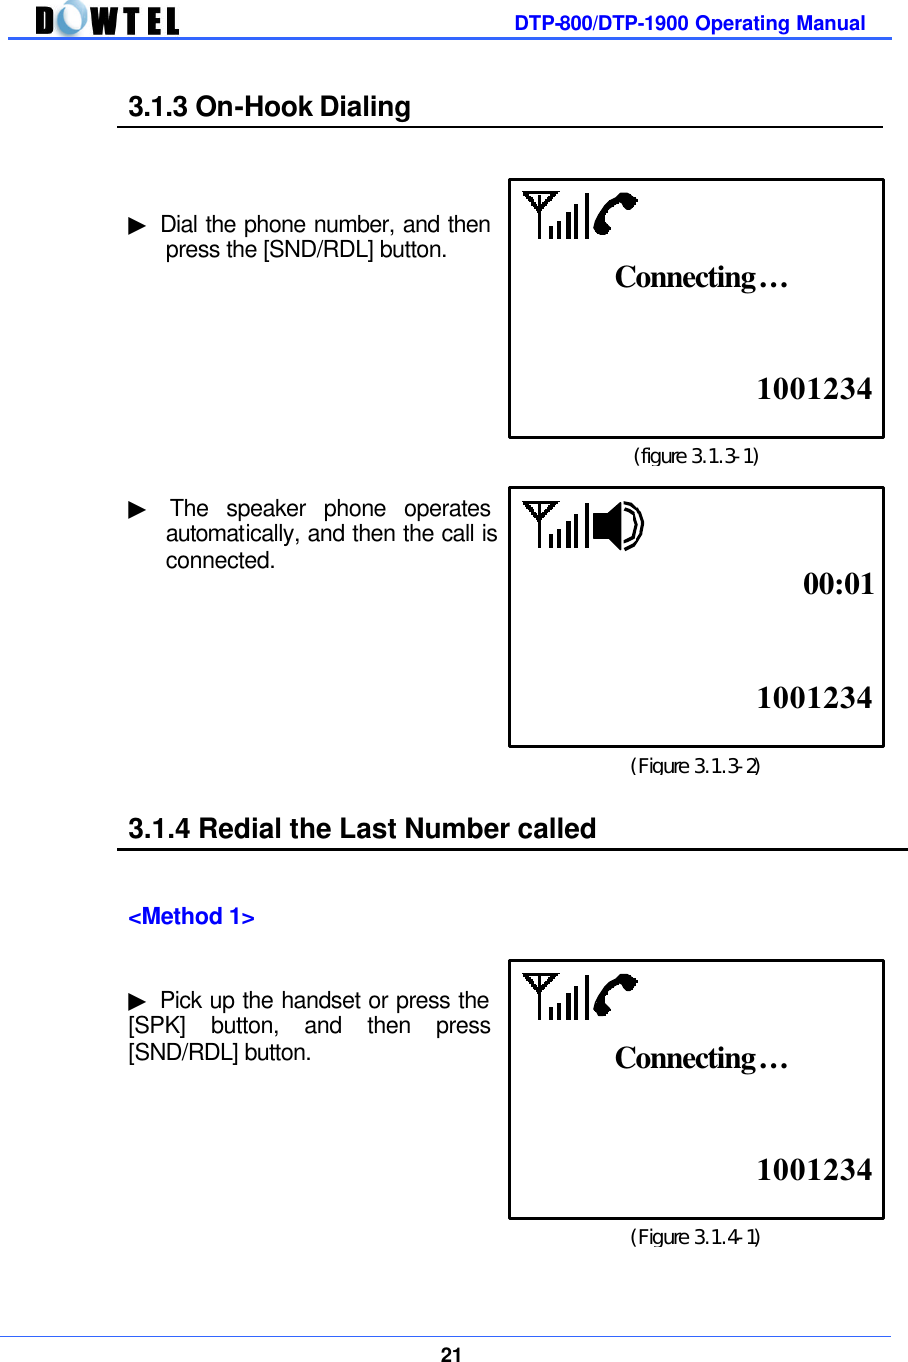         DTP-800/DTP-1900 Operating Manual    21  3.1.3 On-Hook Dialing    ▶ Dial the phone number, and then press the [SND/RDL] button.            ▶ The speaker phone operates automatically, and then the call is  connected.           3.1.4 Redial the Last Number called   &lt;Method 1&gt;   ▶ Pick up the handset or press the [SPK] button, and then press  [SND/RDL] button.          (figure 3.1.3-1)  1001234 Connecting… (Figure 3.1.4-1)  1001234 Connecting… (Figure 3.1.3-2)  1001234 00:01 